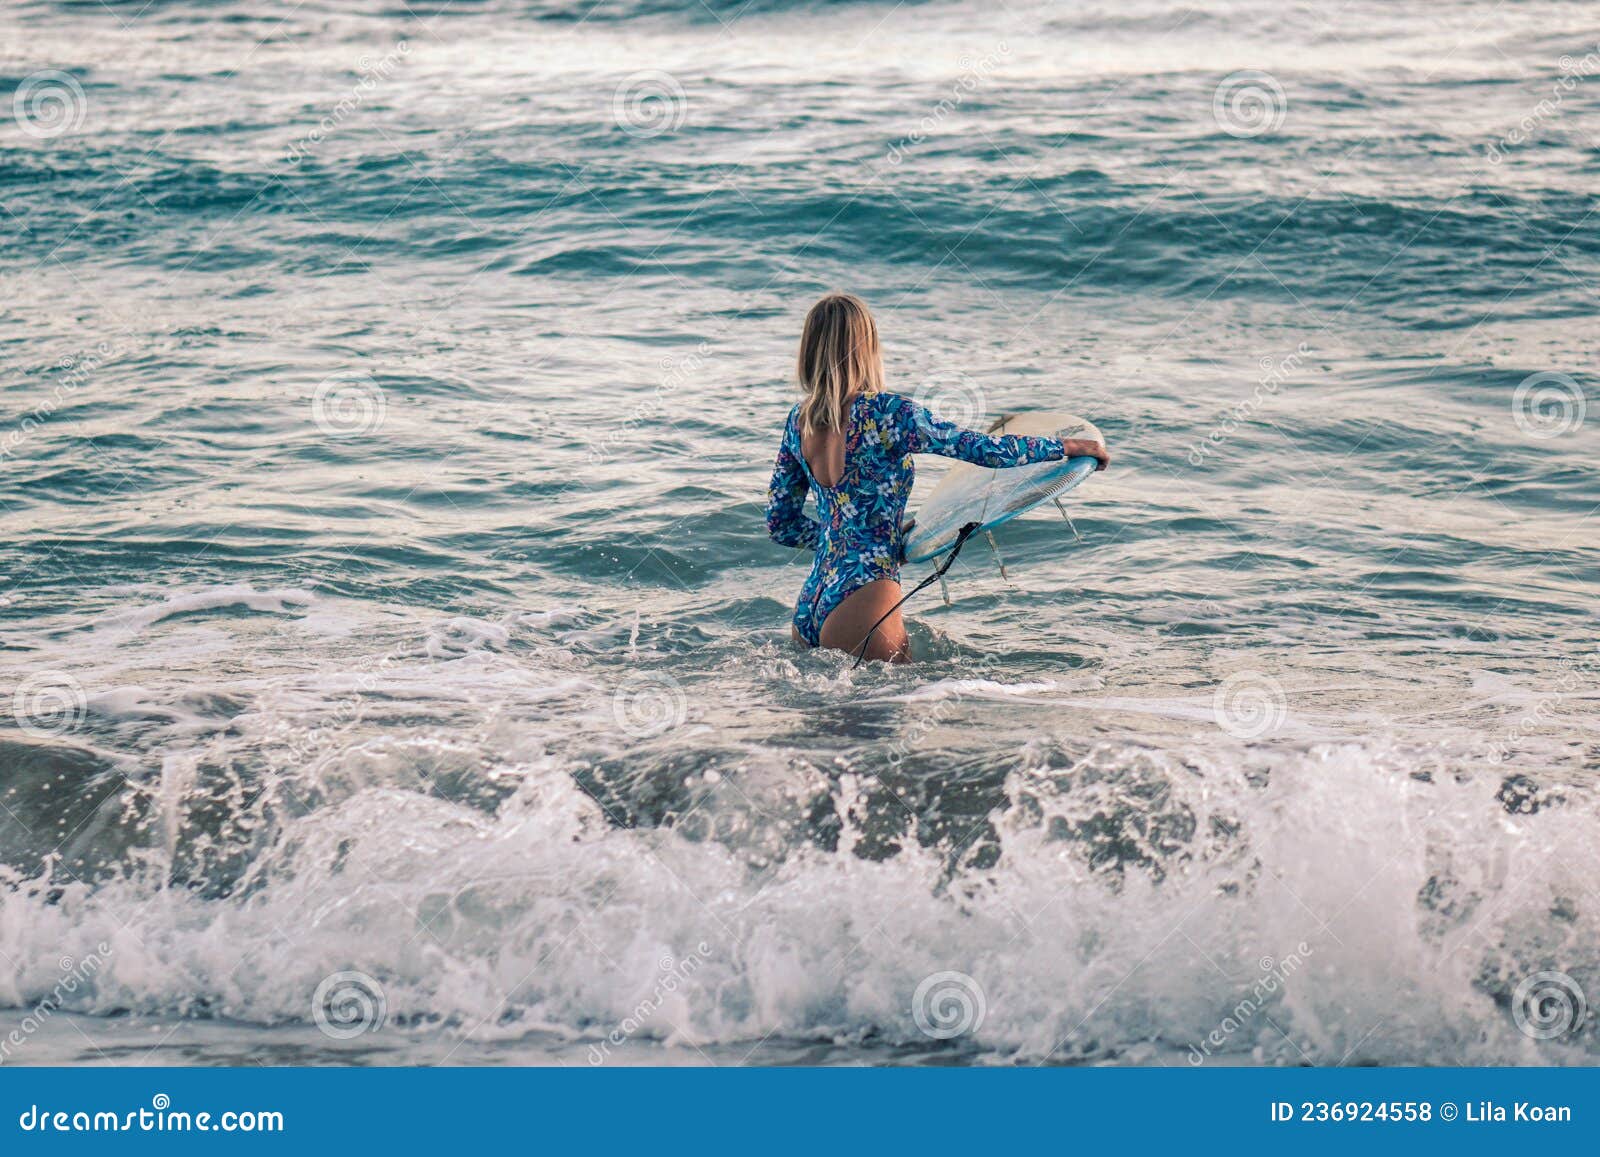 portrait of blond surfer girl with white surf board in blue ocean pictured from the water in encuentro beach